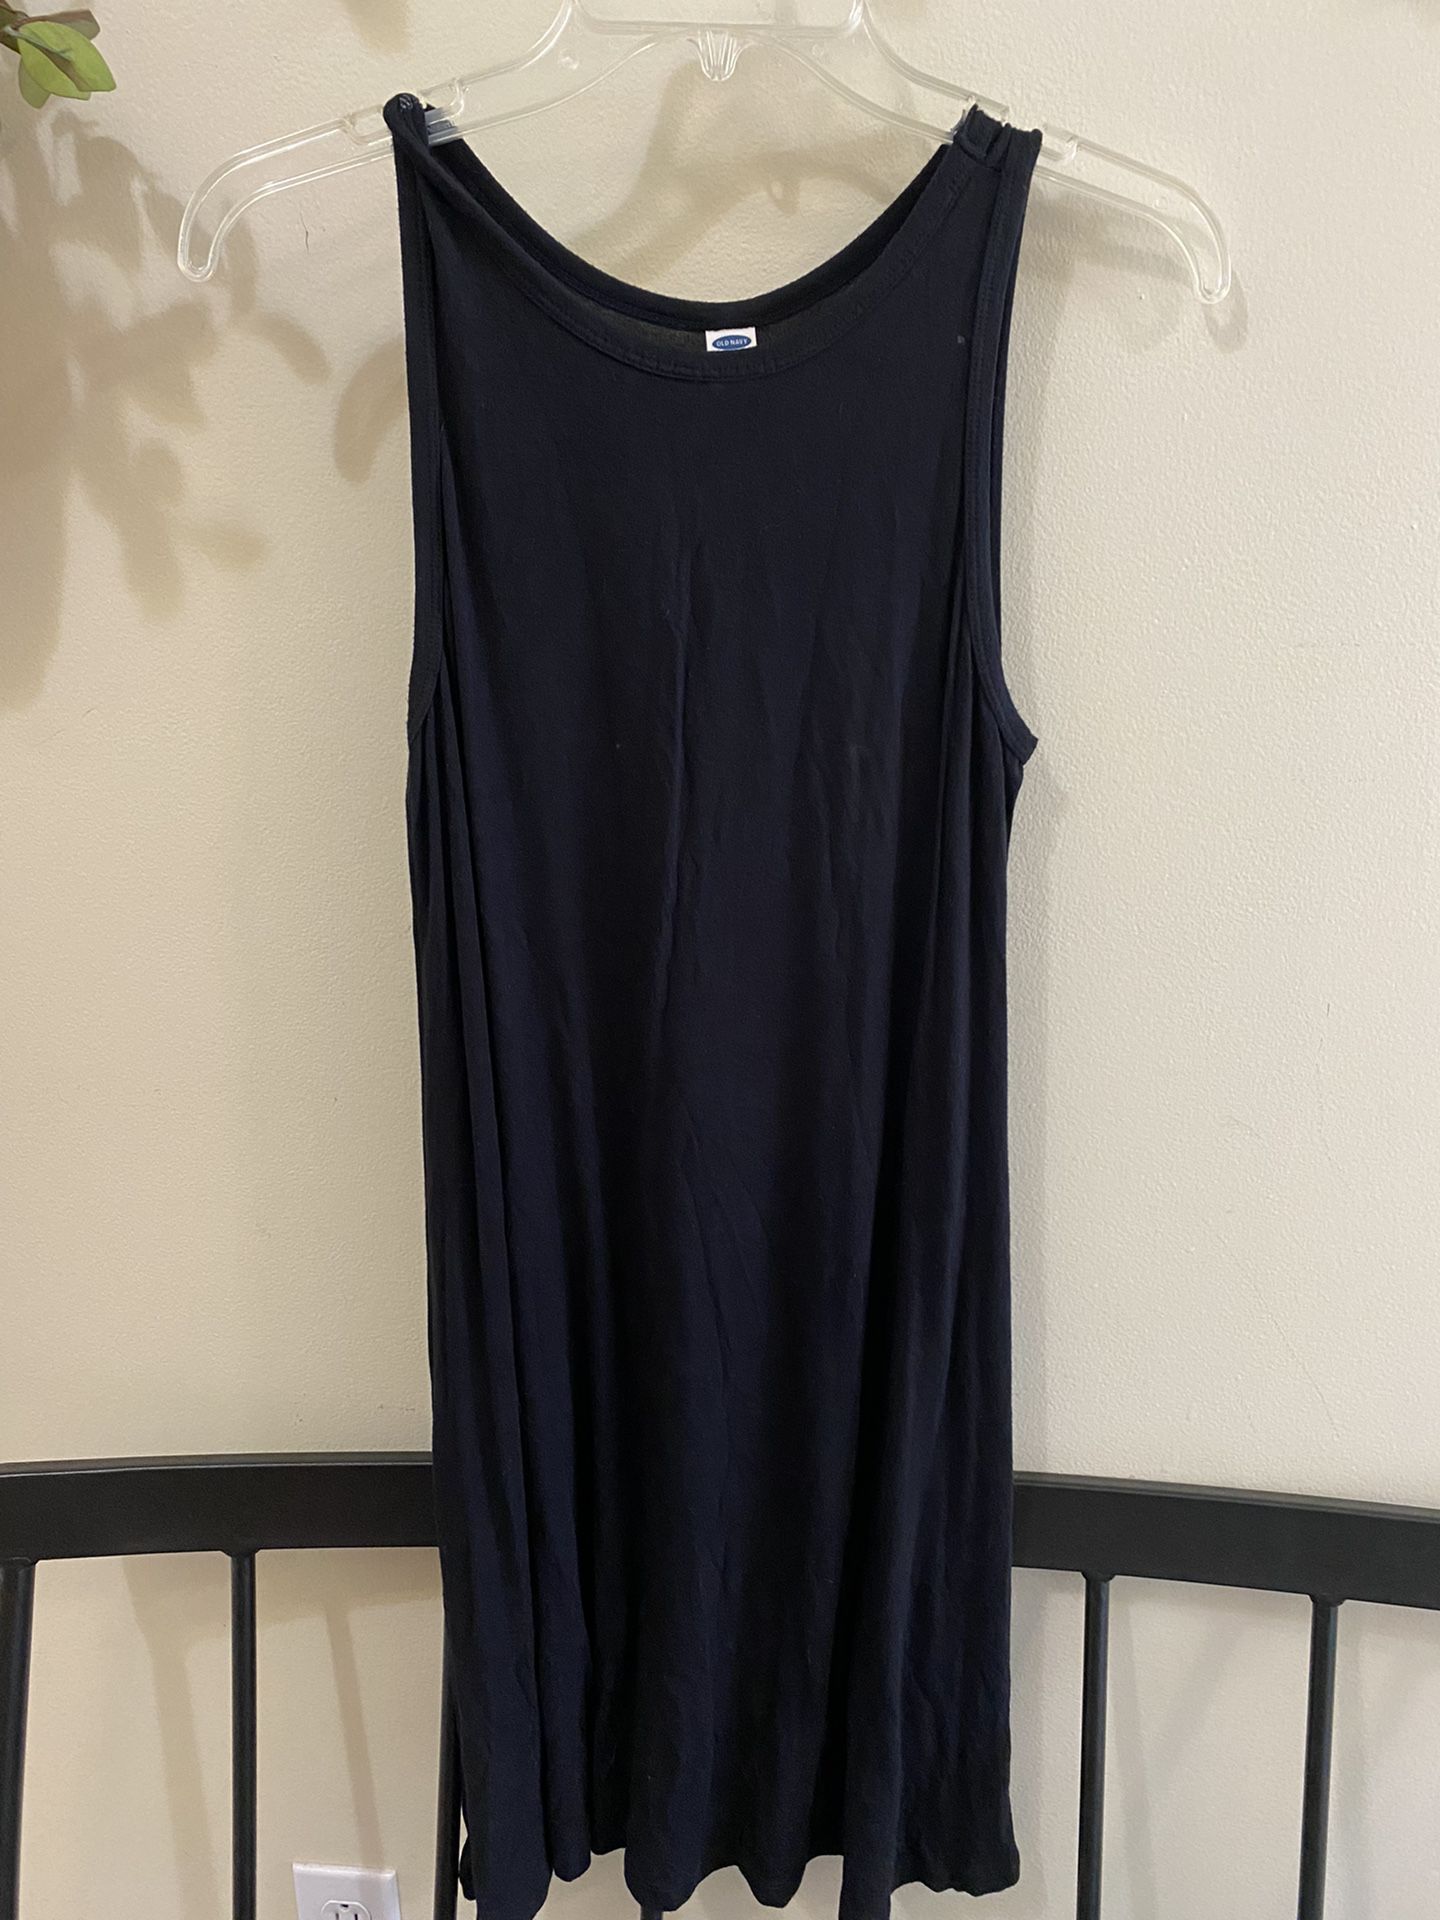 Old navy Ladies Small stretchy cotton sundress! Summer little black dress!